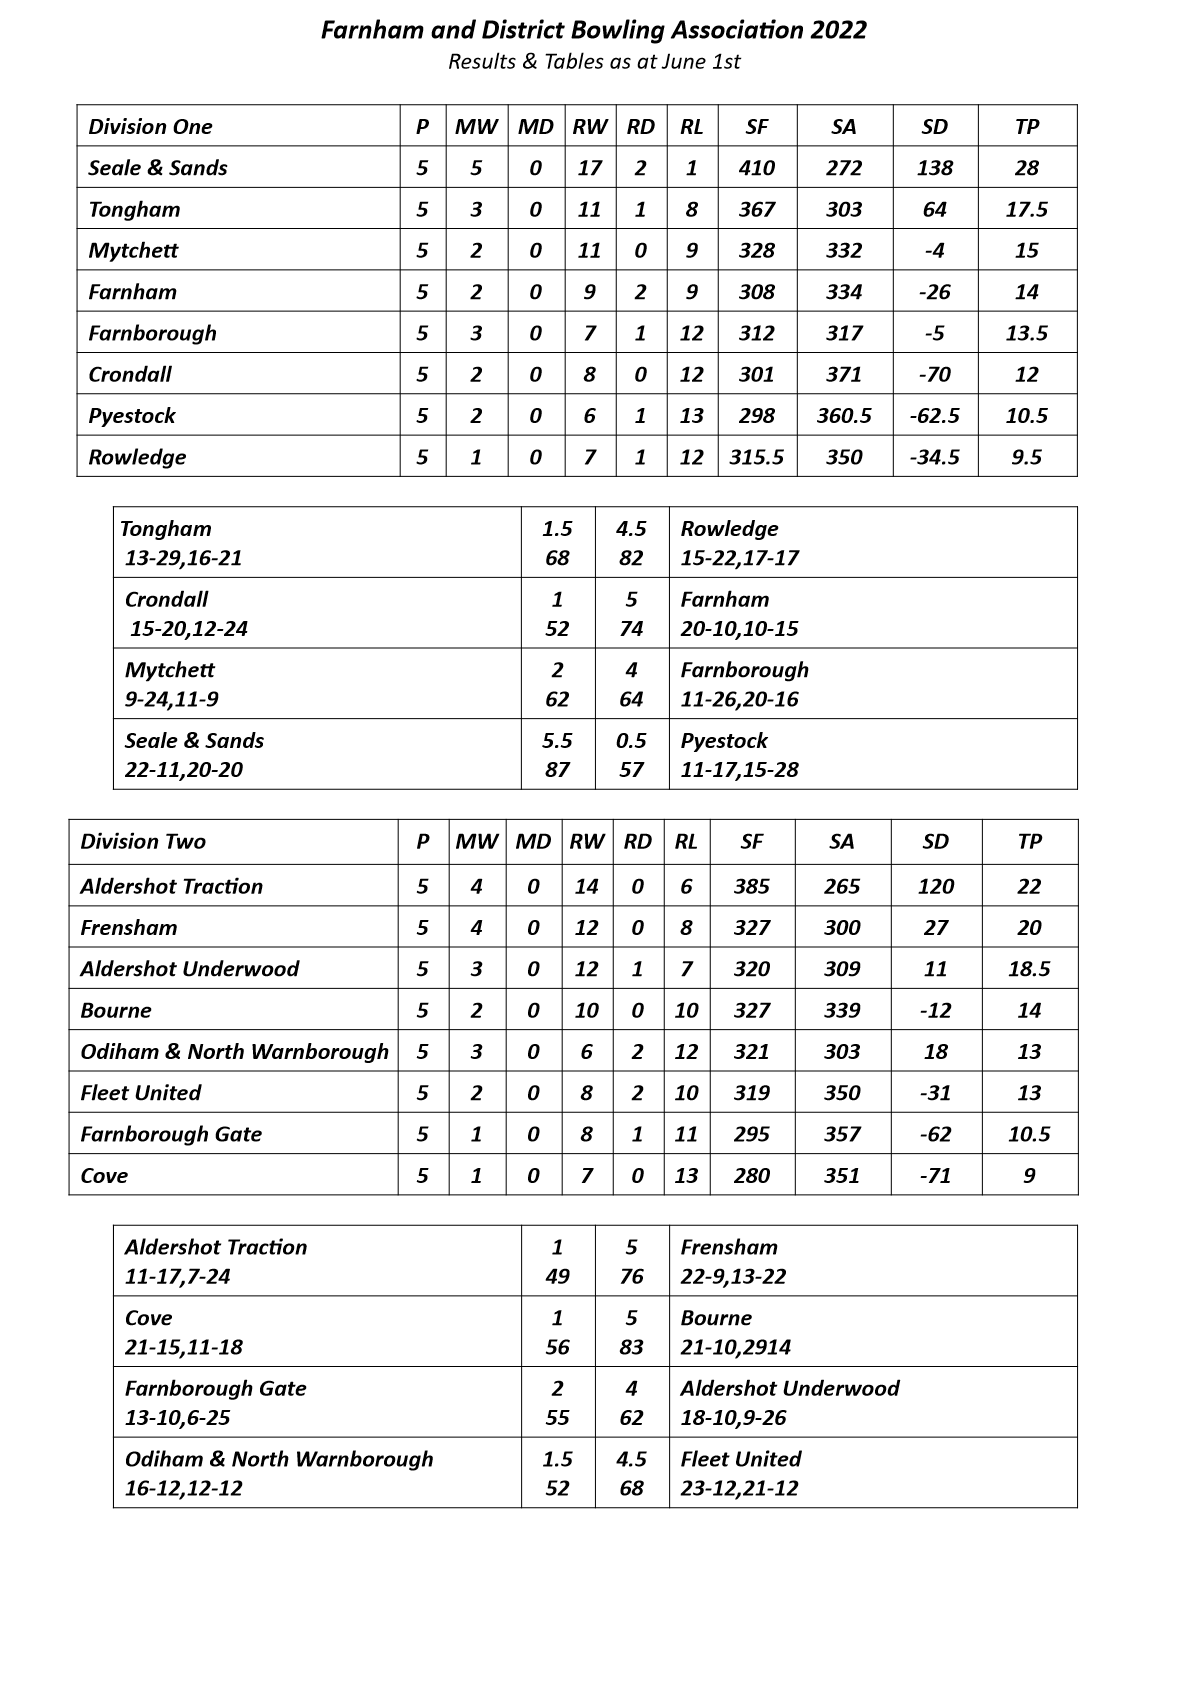  Farnham&District Bowling Association  Tables & Results as at June 1st